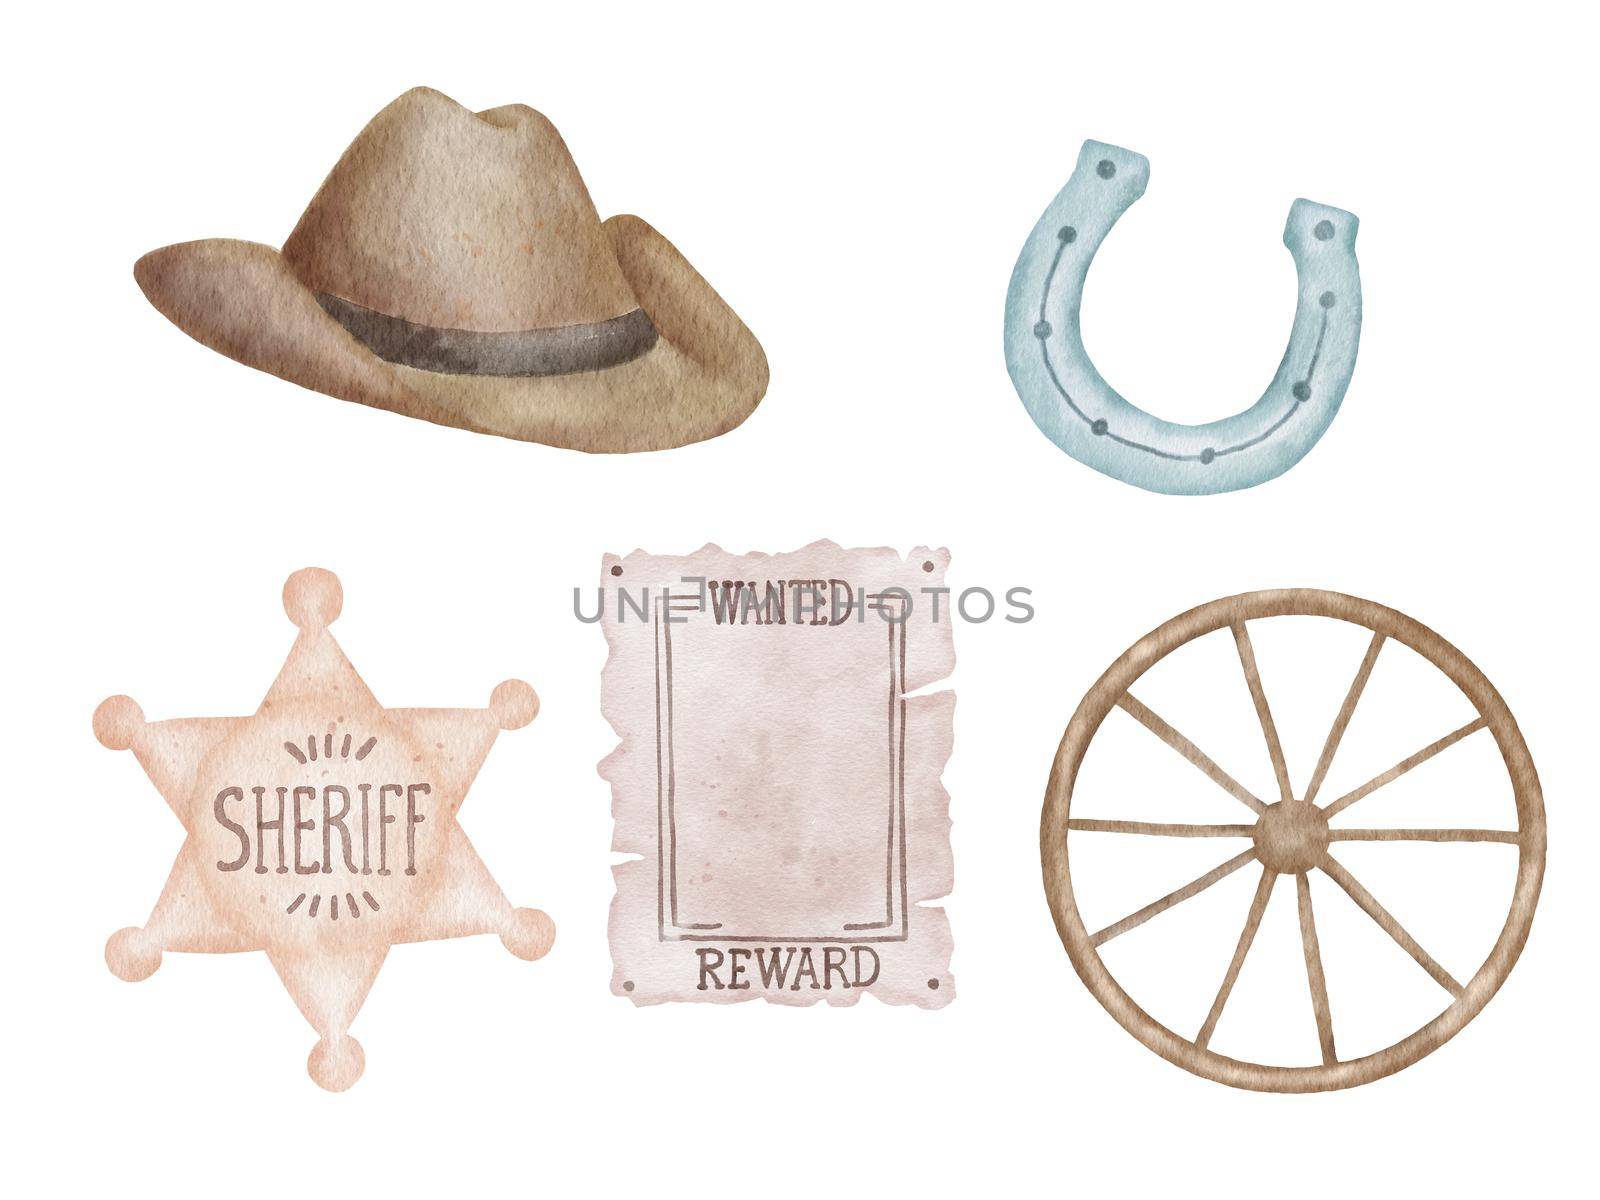 Hand drawing watercolor baby cowboy set. Wild west theme things isolated on white background. Sheriff star, poster, wheel and hat